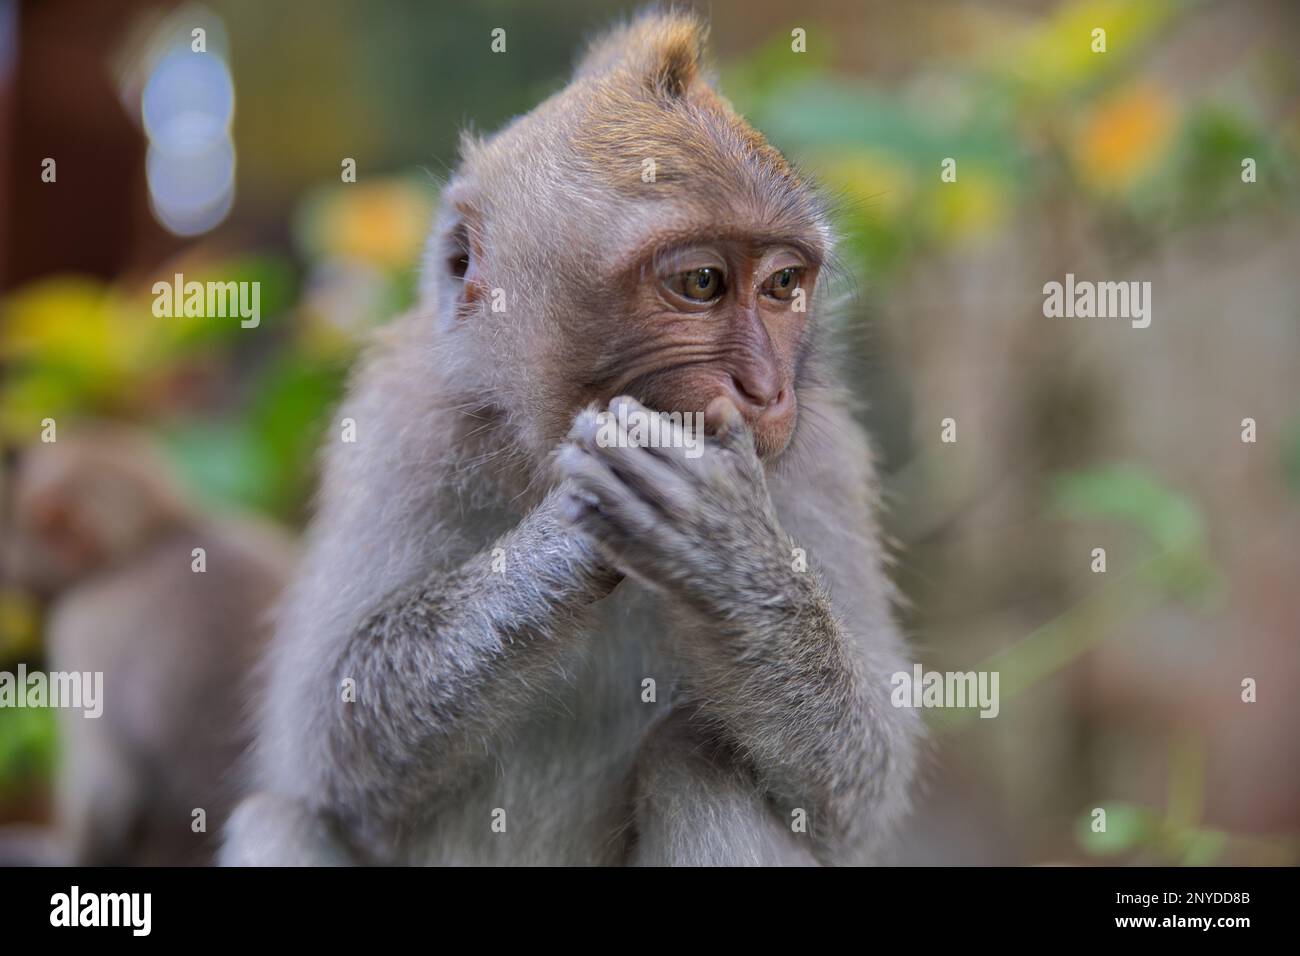 Portrait close-up of a young cynomolgus monkey holding his hands in front of his mouth, in the background diffuse foliage and another monkey. Stock Photo